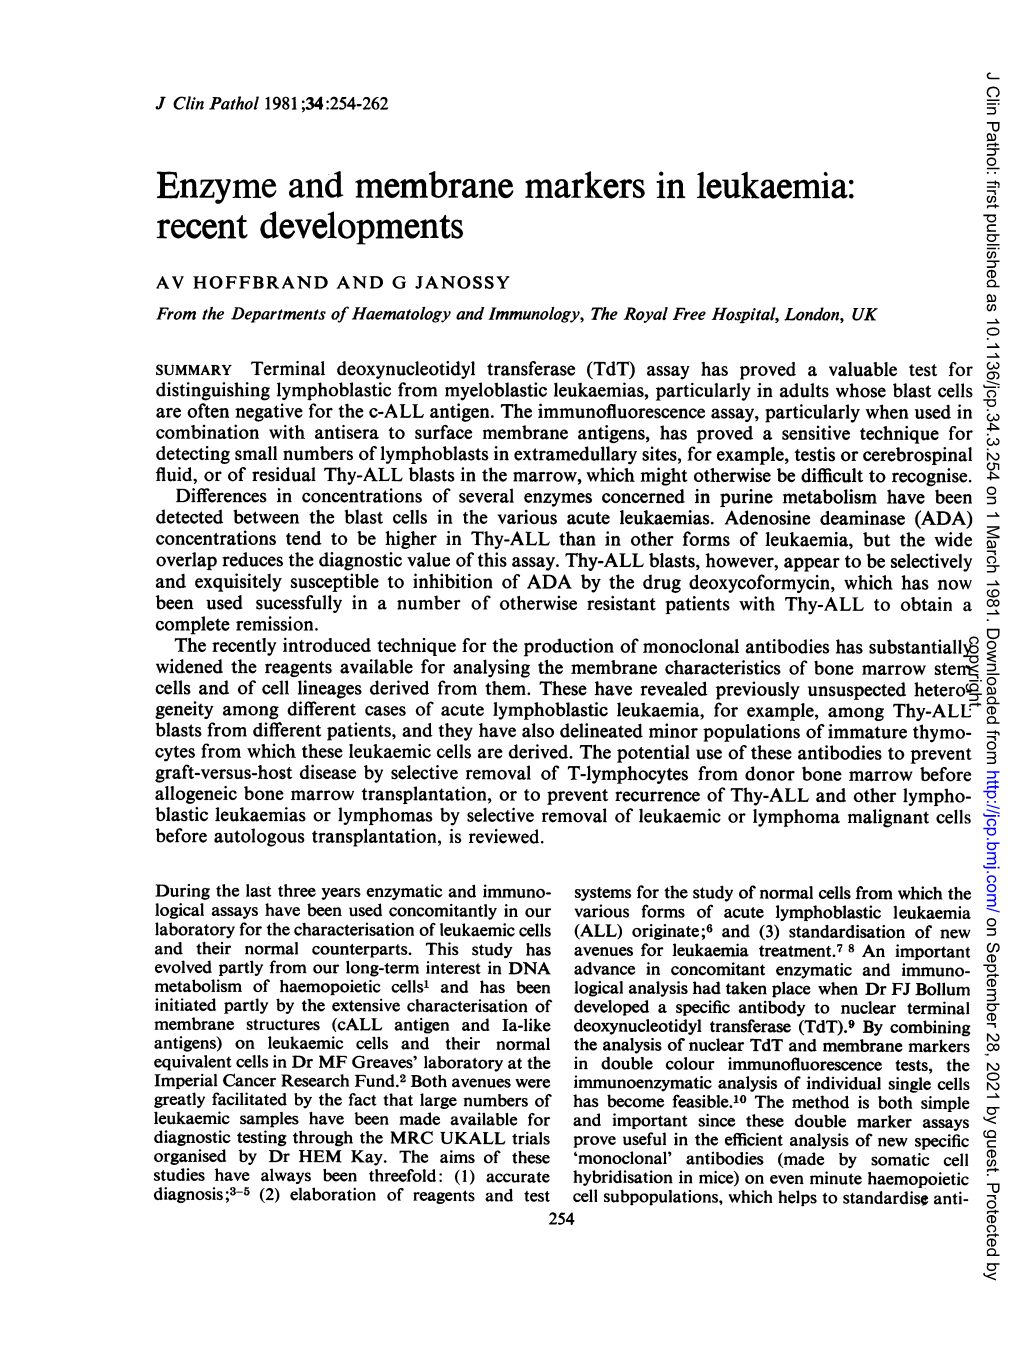 Enzyme and Membrane Markers in Leukaemia: Recent Developments